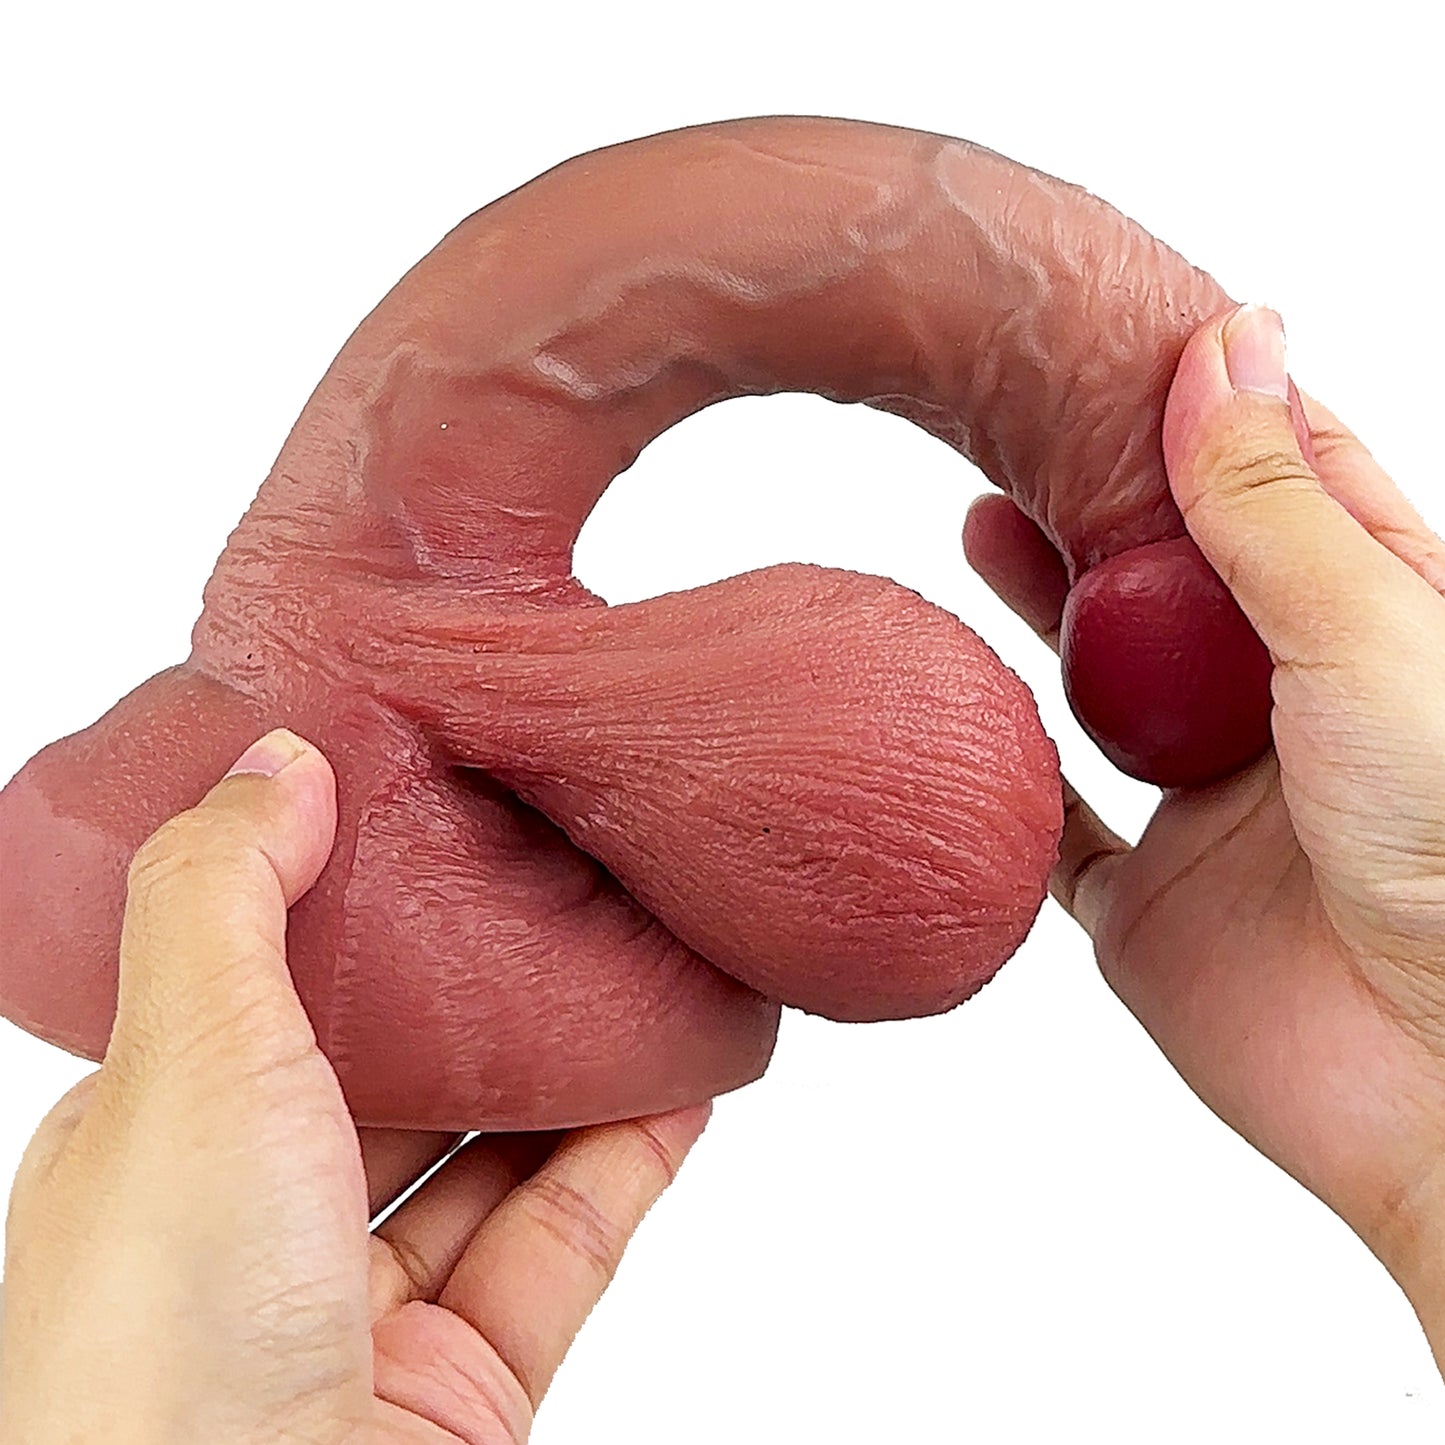 9 inch Realistic Dildo - Life Size Anal Dildo Soft Silicone Touch Female Sex Toys